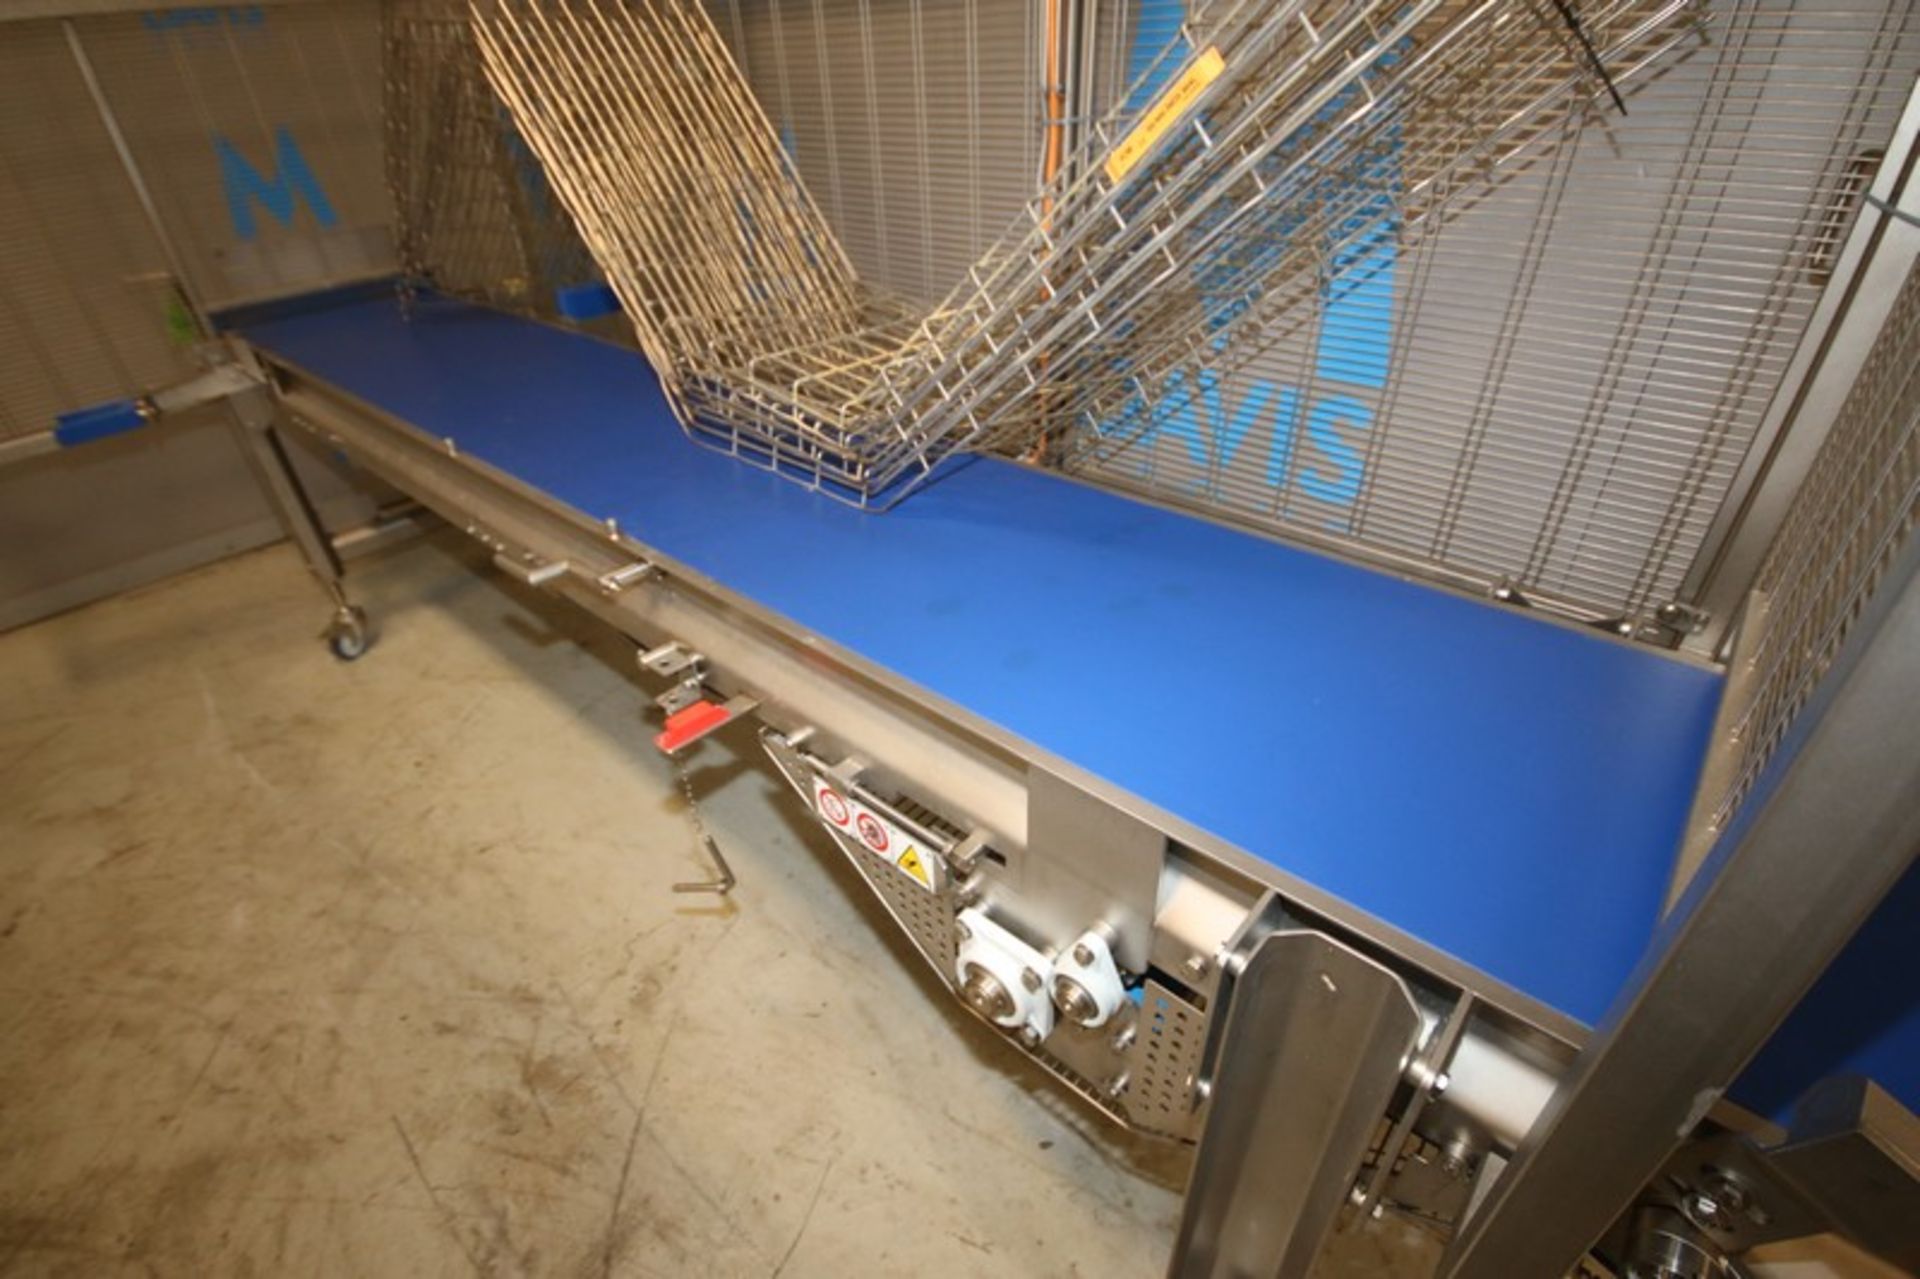 2019 Alimec Aprox. 149" L x 19.5" W x 34" H S/S Belt Conveyor, SN 813-52, with Bauer S/S Drive Motor - Image 3 of 4